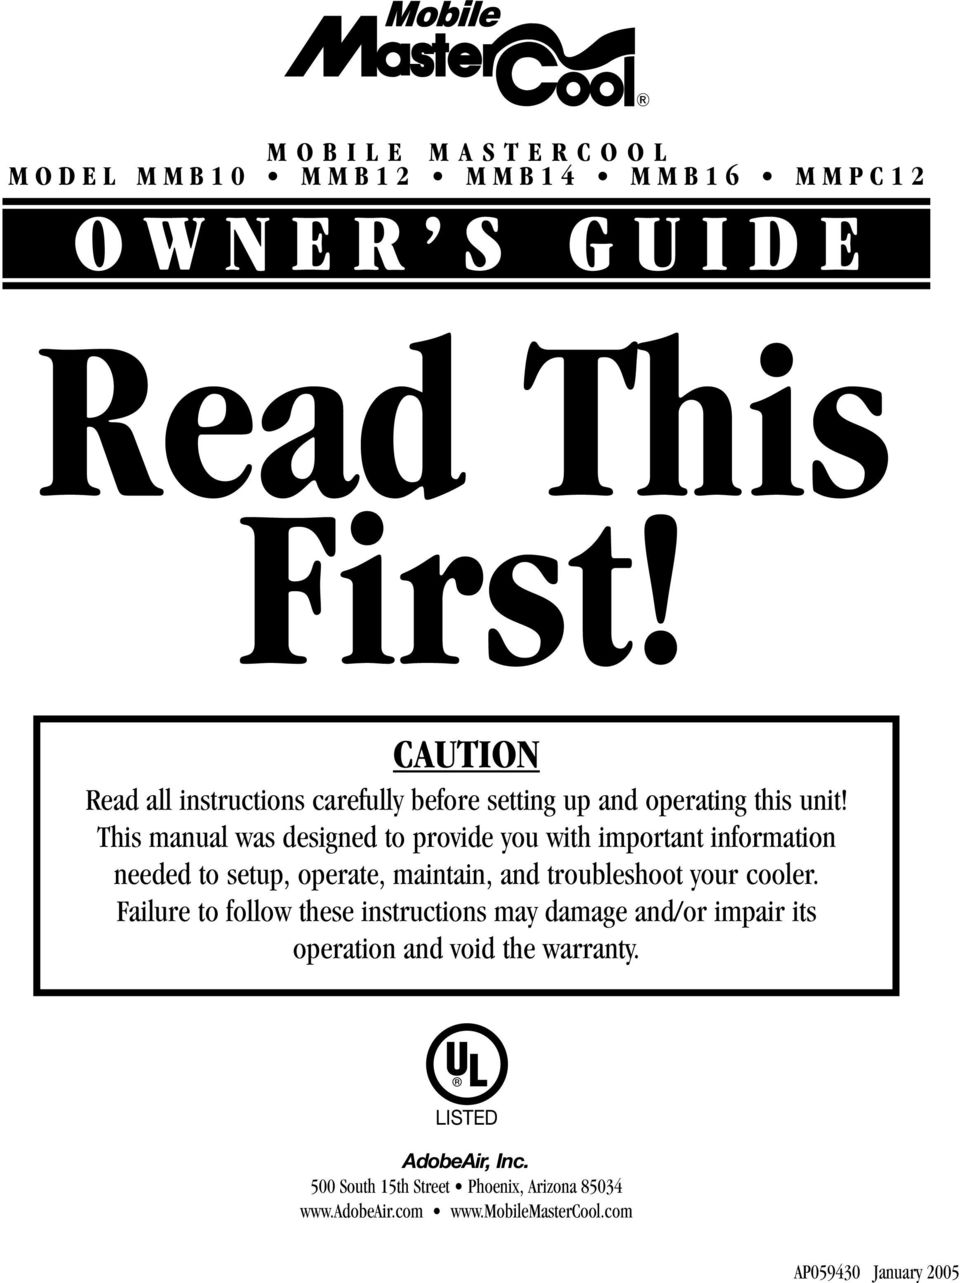 This manual was designed to provide you with important information needed to setup, operate, maintain, and troubleshoot